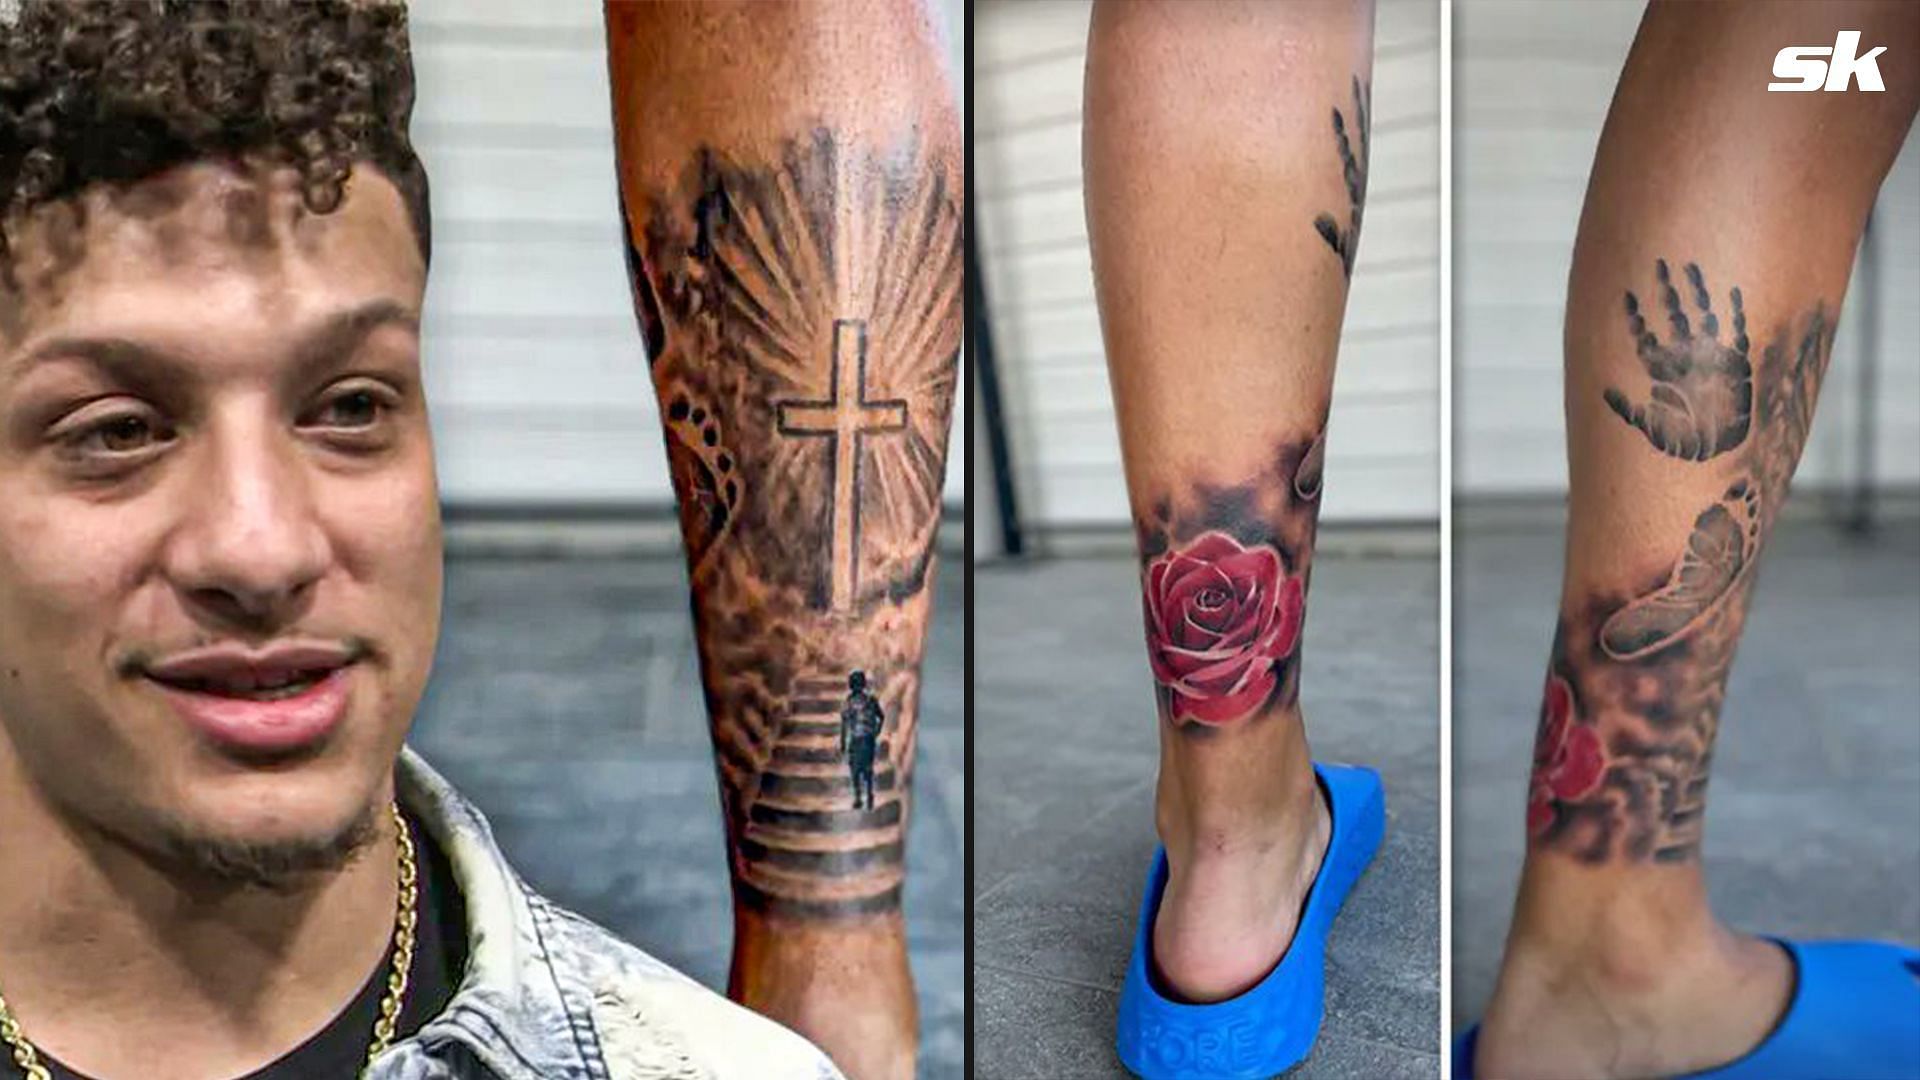 Patrick Mahomes unveils tattoo of his baby's hands on his calves